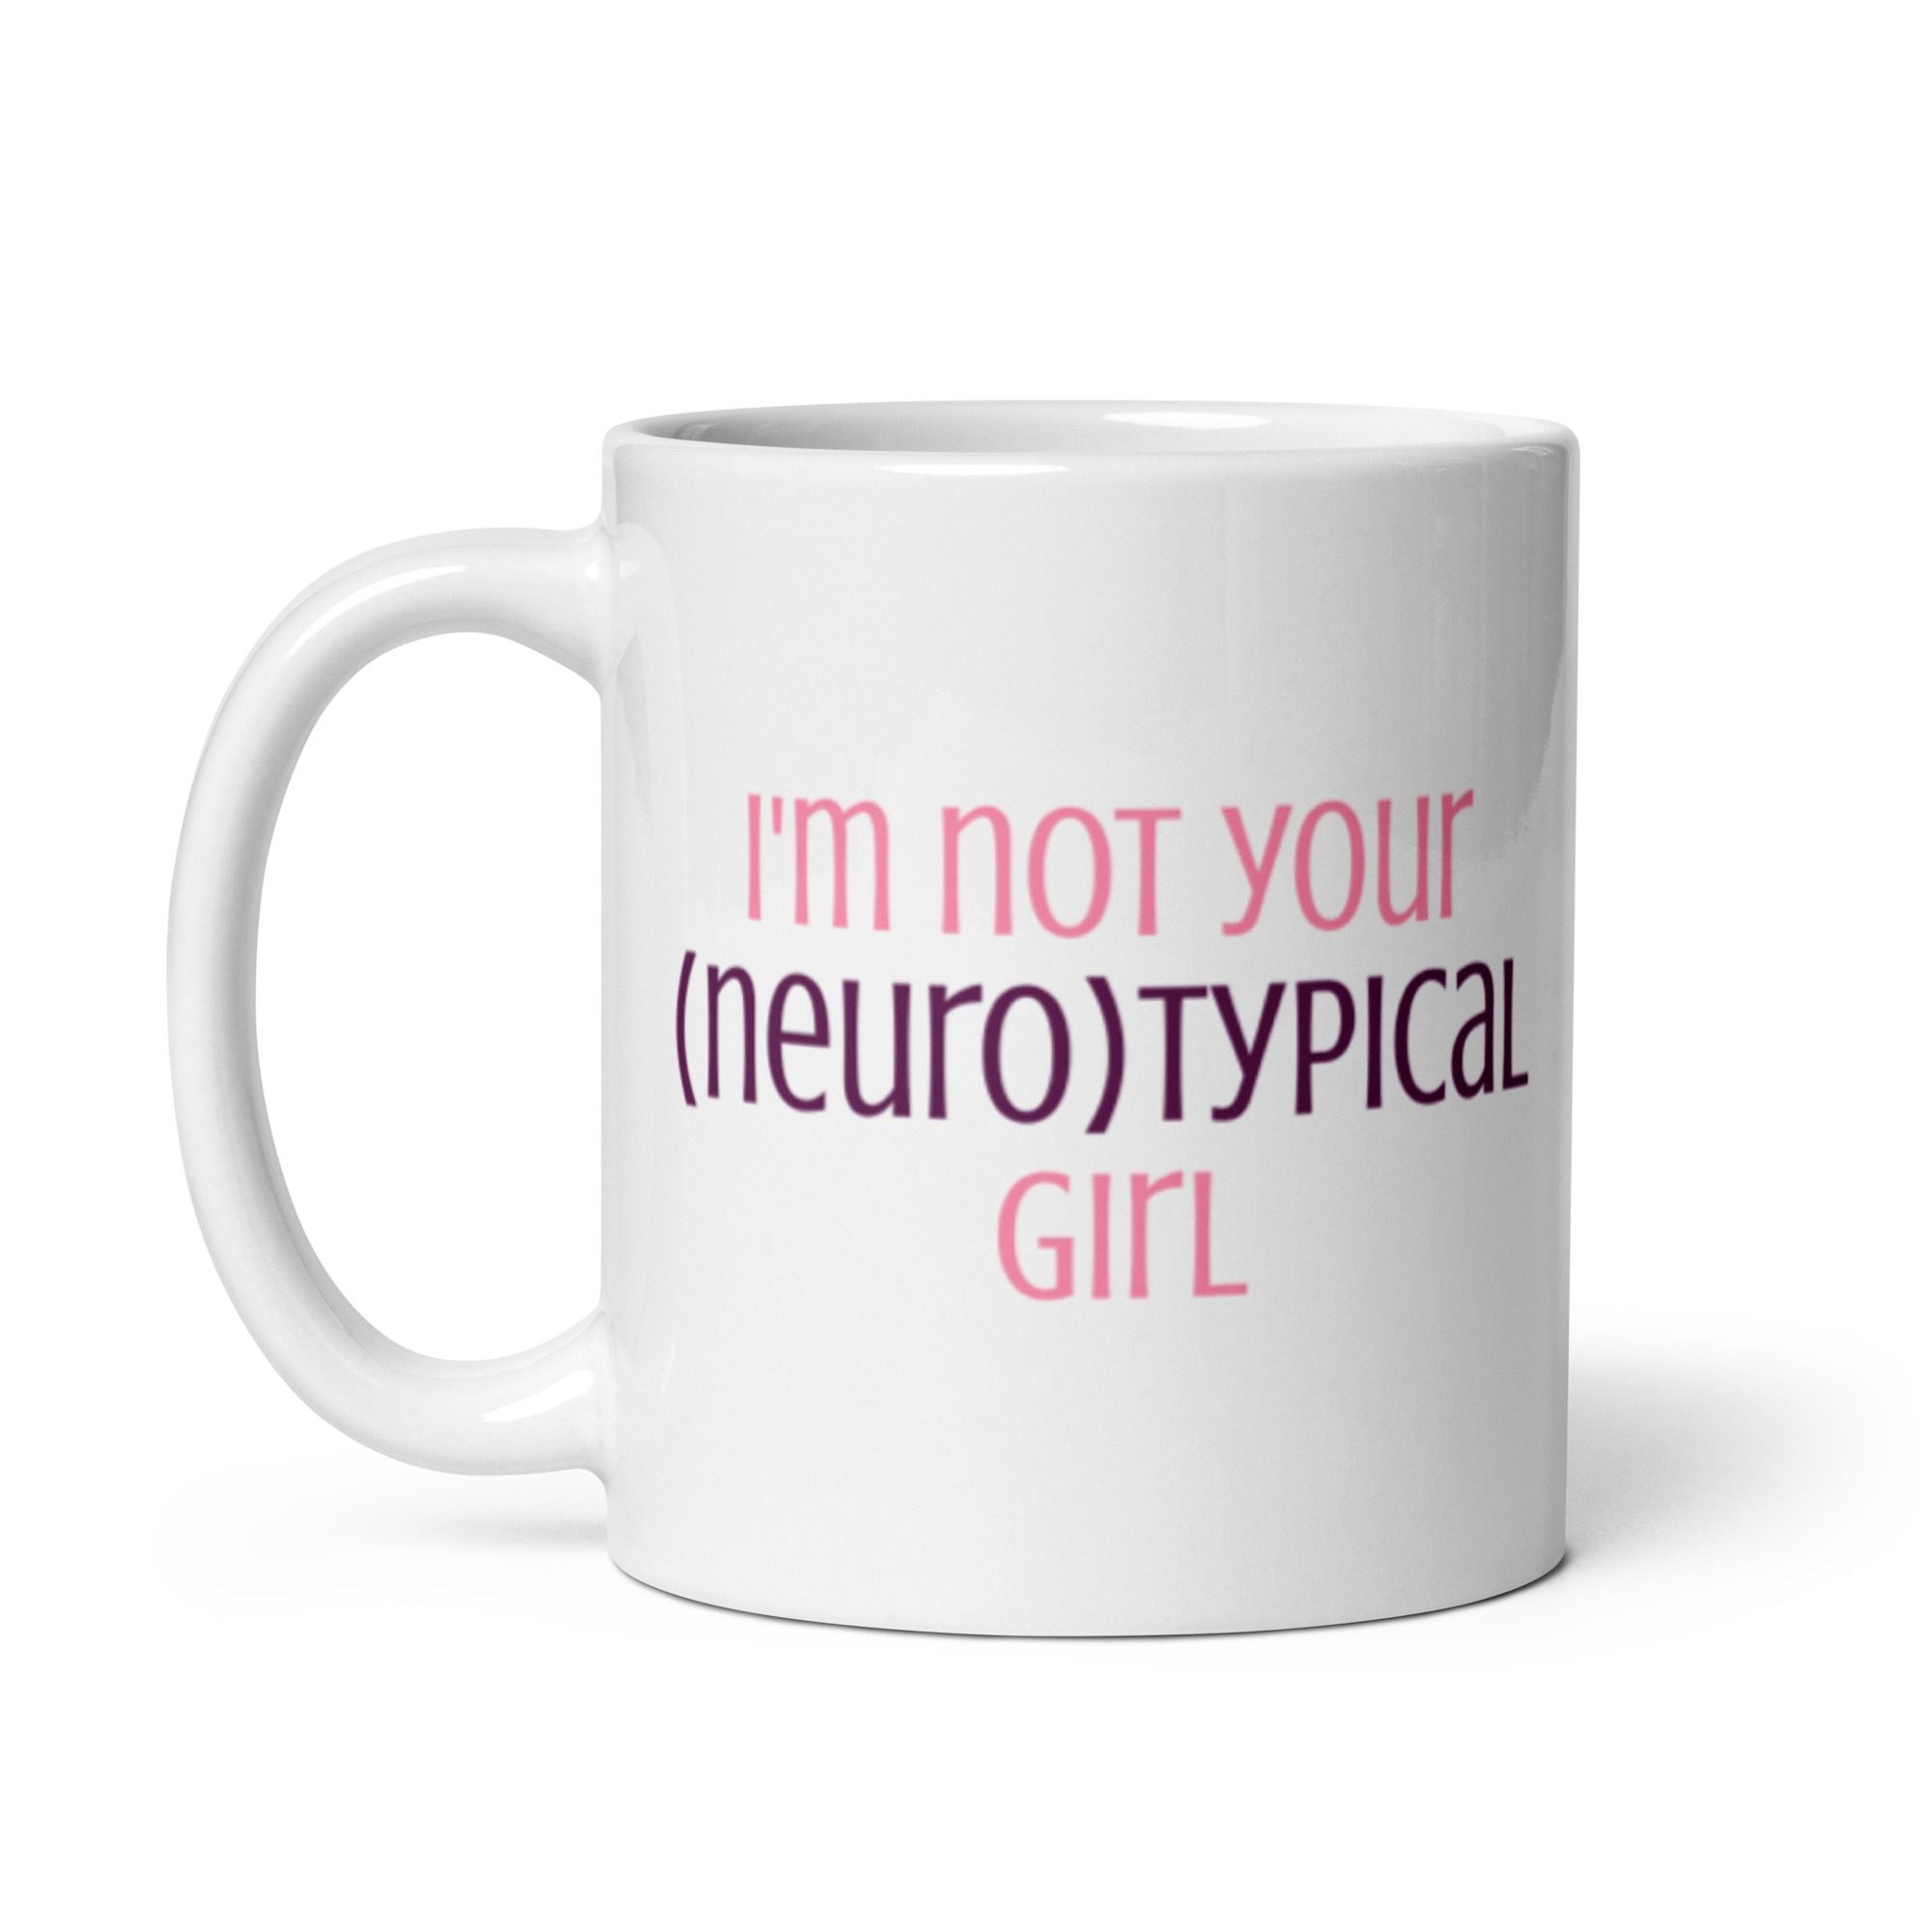 I’m Not Your Neurotypical Girl Mug